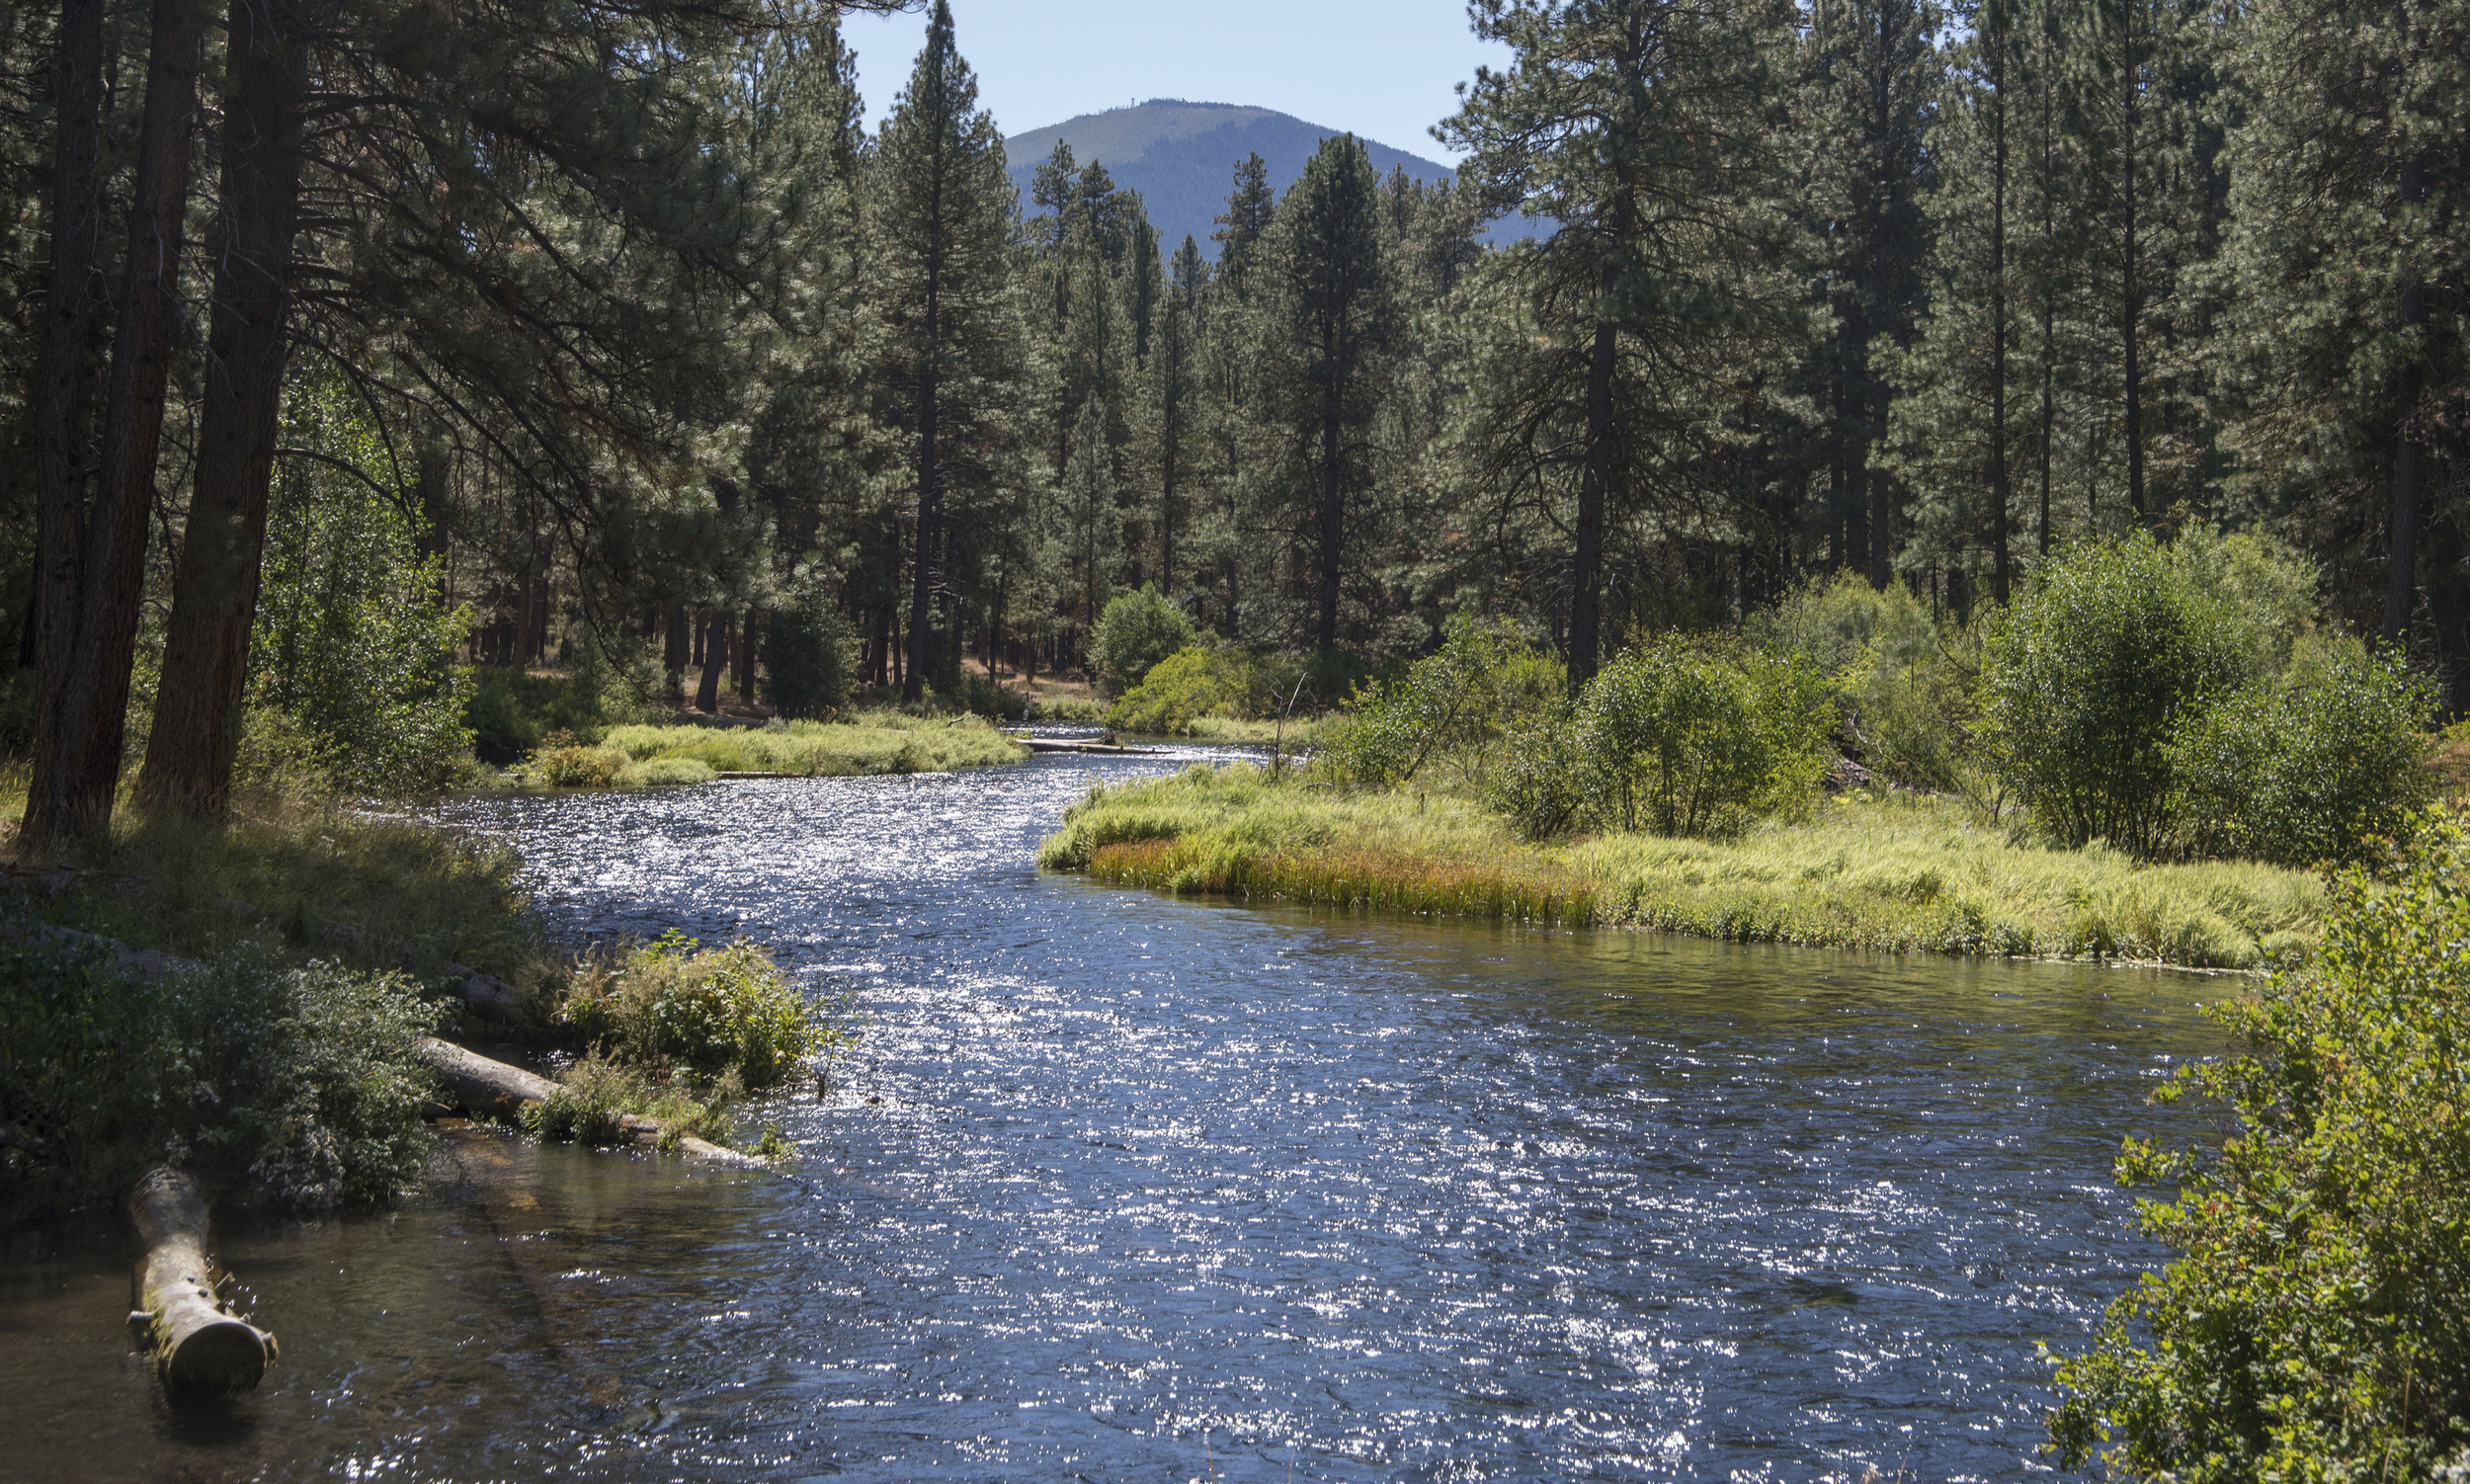  The Deschutes and McKenzie rivers flow nearby 